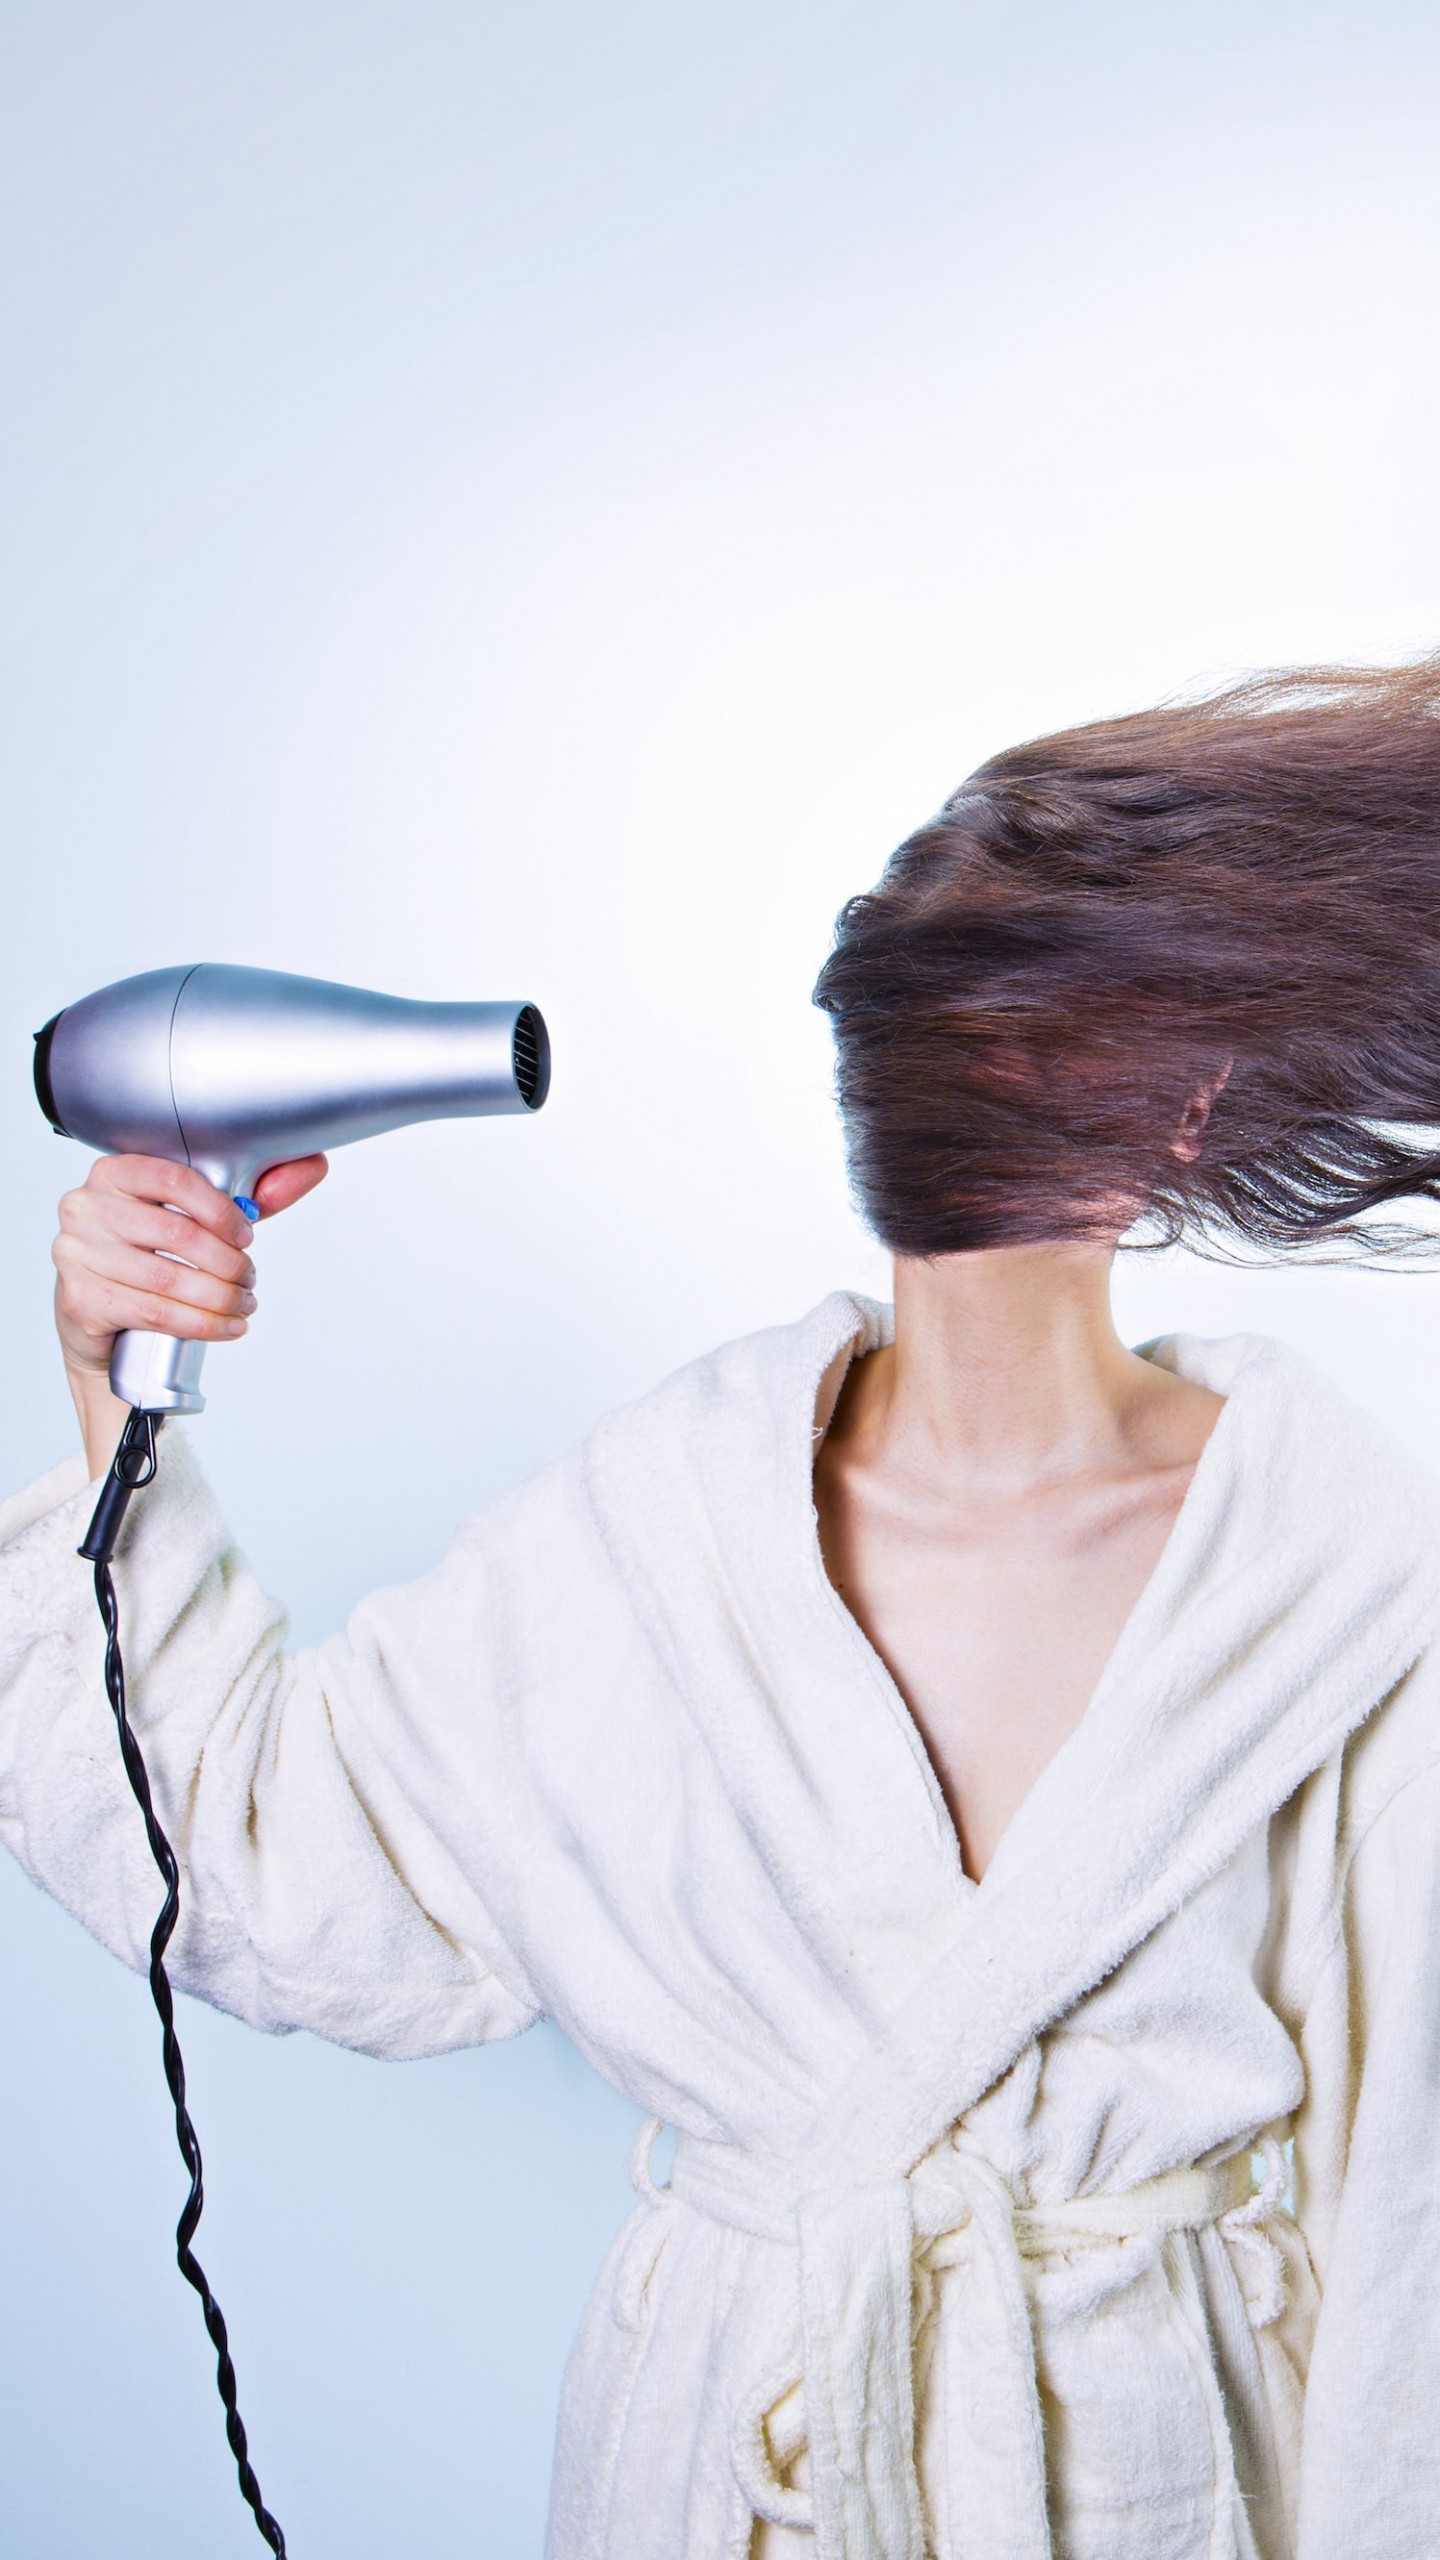 Powerful Hair Dryer Wallpaper for SAMSUNG Galaxy S6